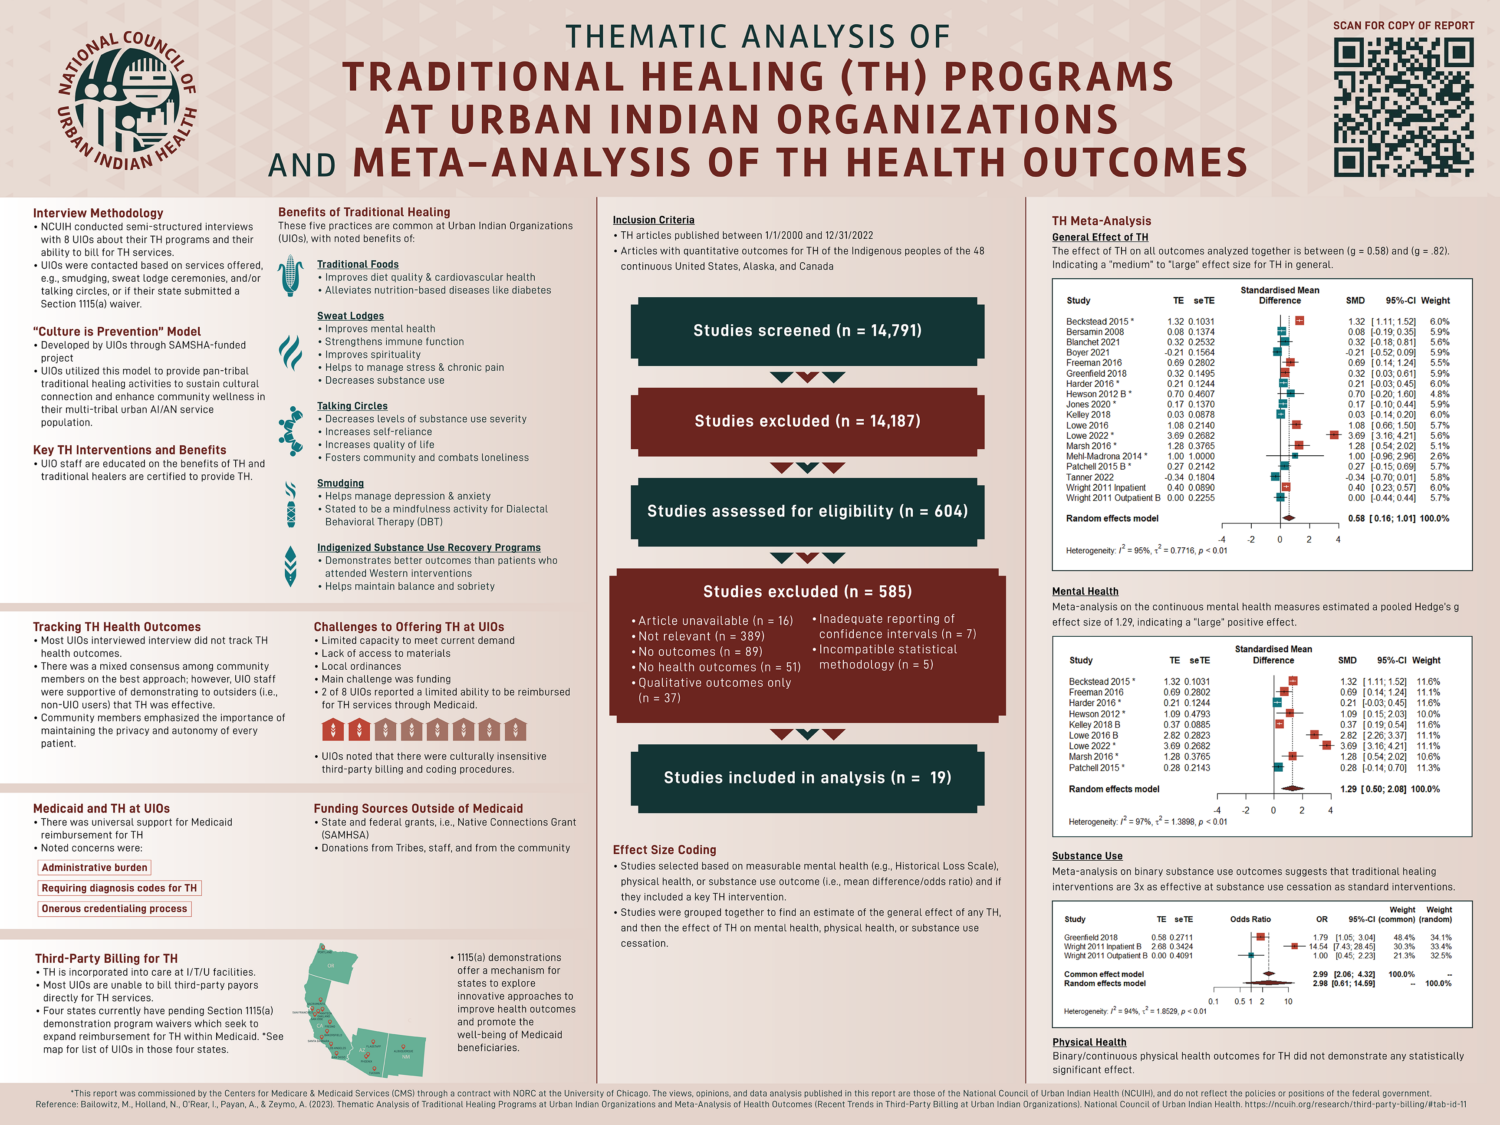 Thematic Analysis of Traditional Healing (TH) Programs at Urban Indian Organizations and Meta-Analysis of TH Health Outcomes